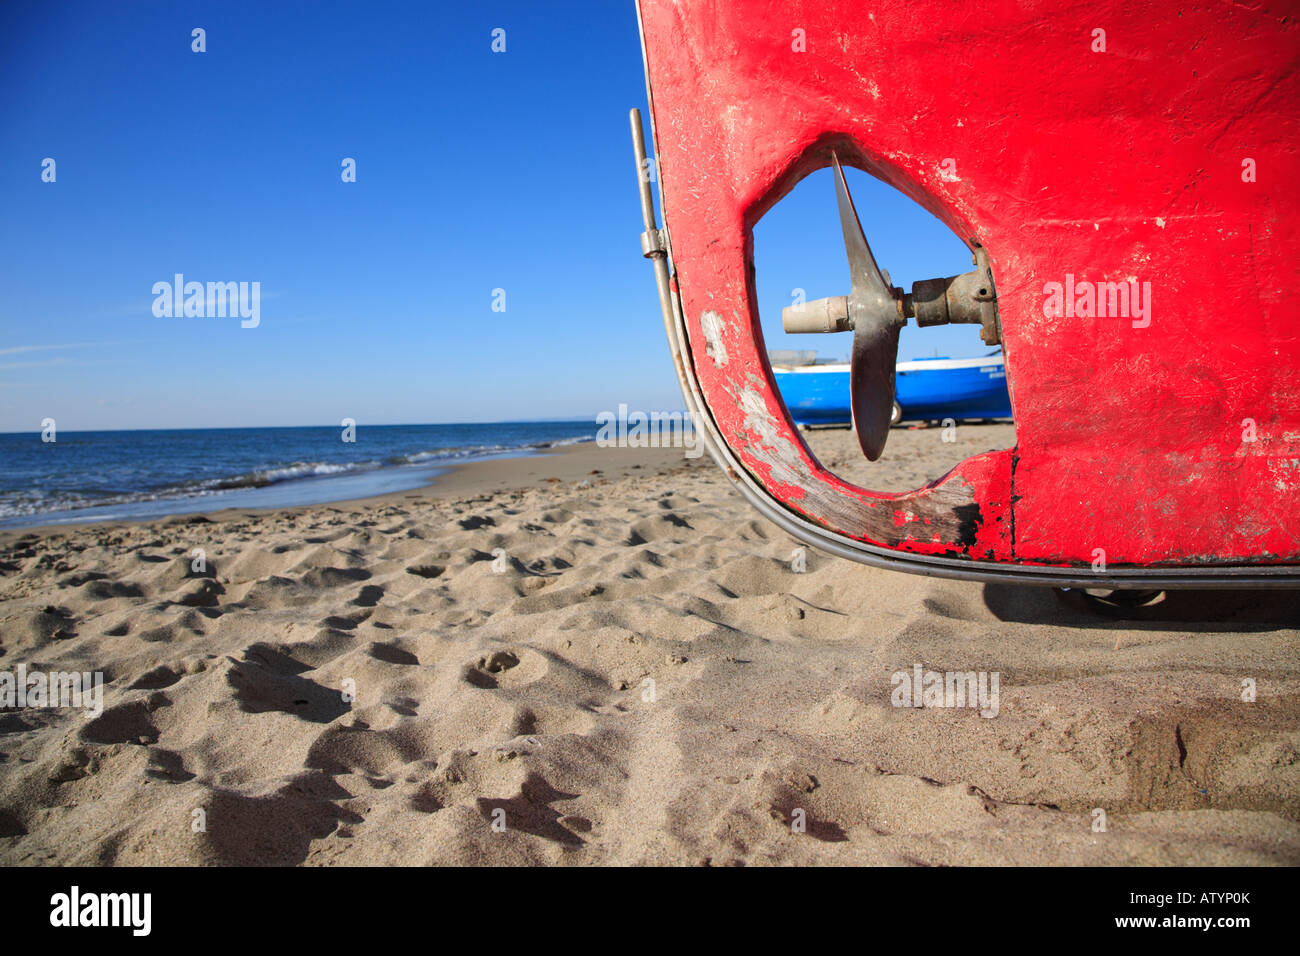 red fishing boat pulled up on sandy beach Stock Photo - Alamy